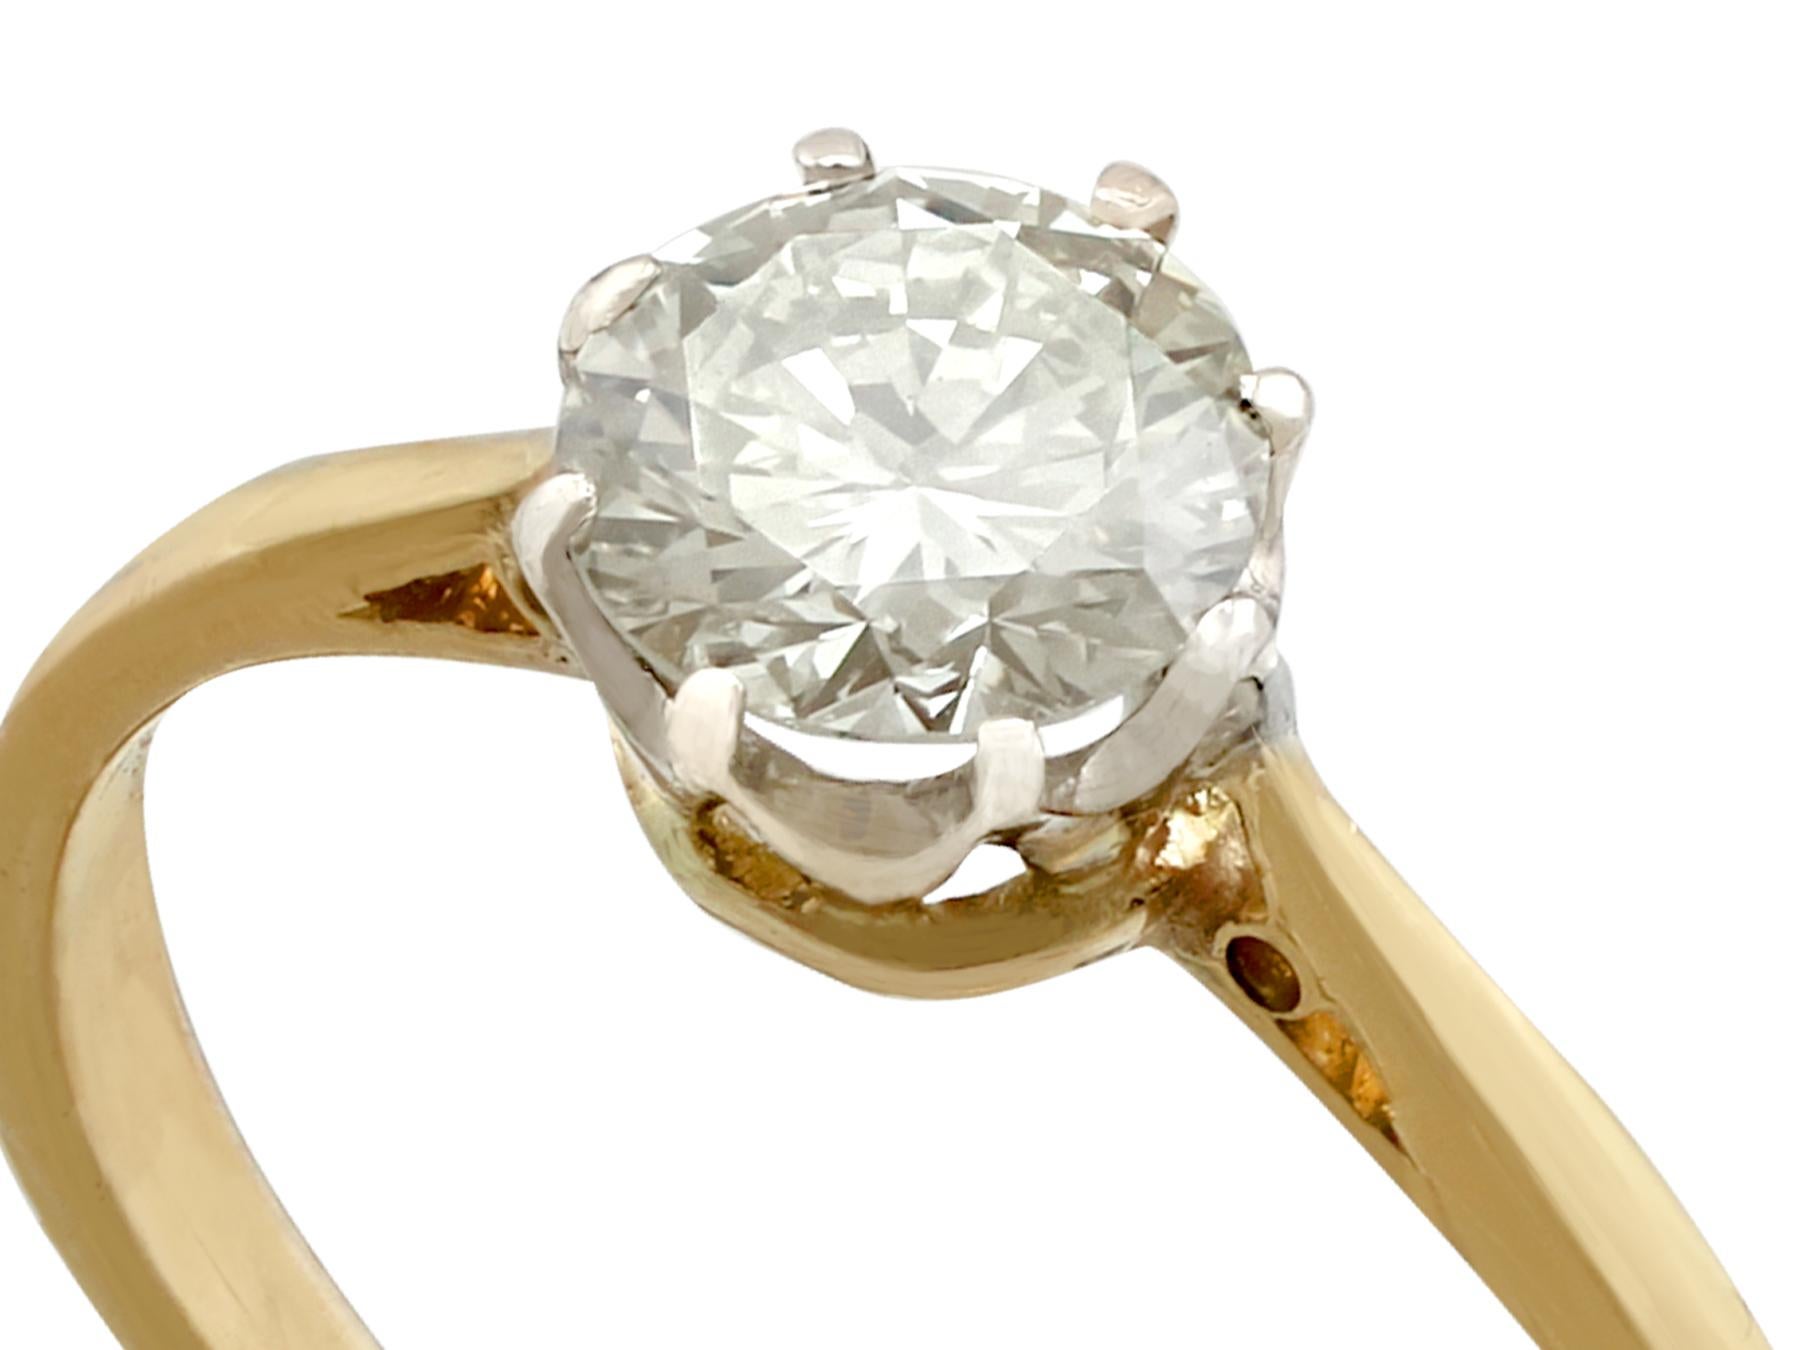 An impressive vintage 0.65 carat diamond and 18 carat yellow gold, 18 carat white gold set engagement ring; part of our diverse diamond jewellery and estate jewelry collections.

This fine and impressive gold diamond solitaire ring has been crafted